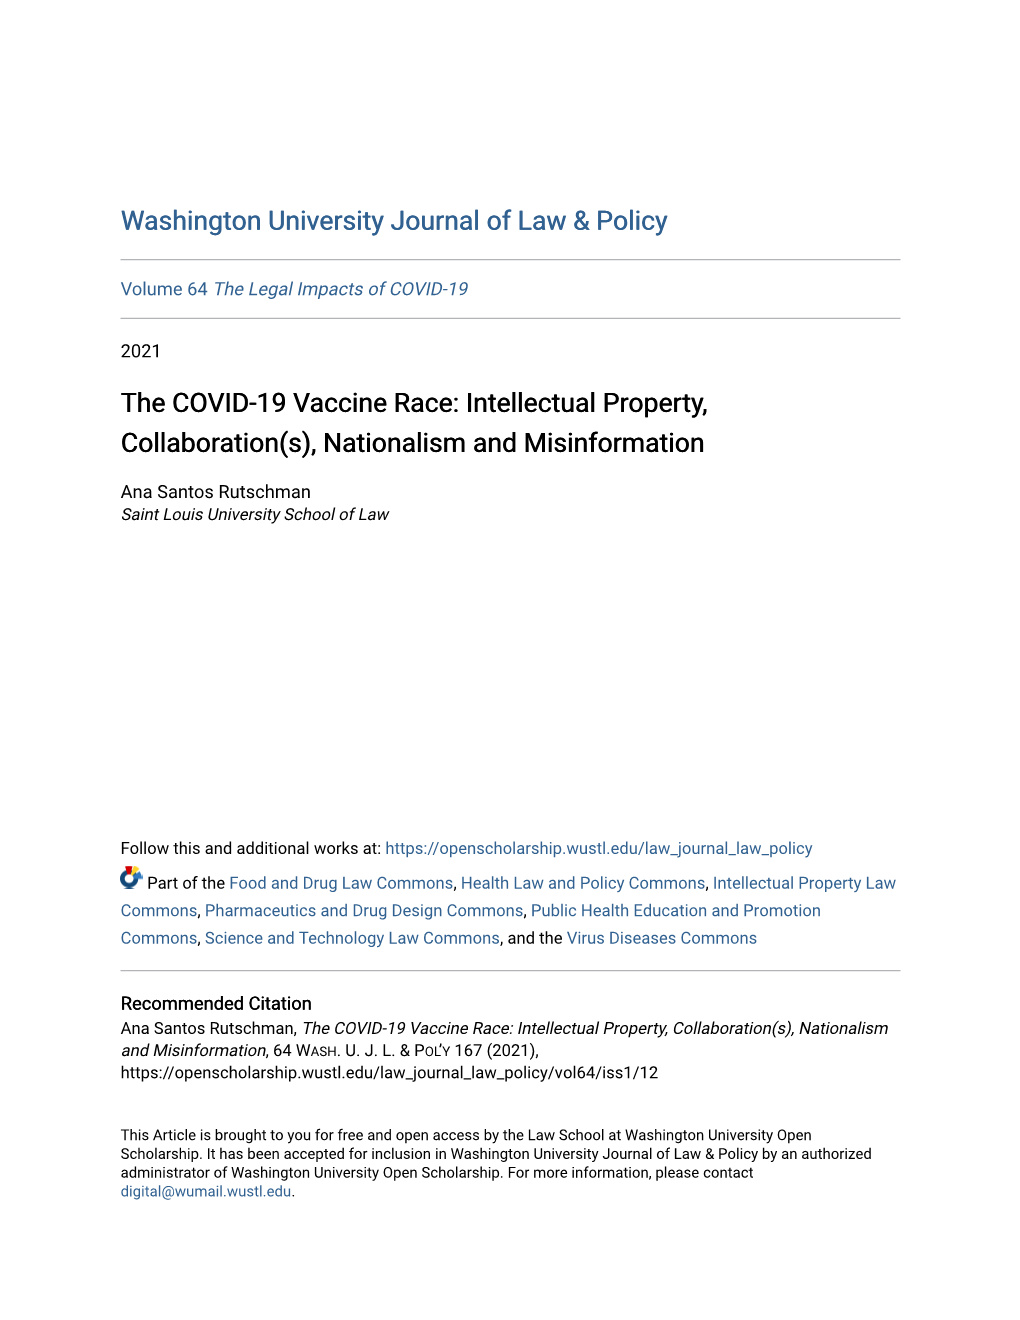 The COVID-19 Vaccine Race: Intellectual Property, Collaboration(S), Nationalism and Misinformation